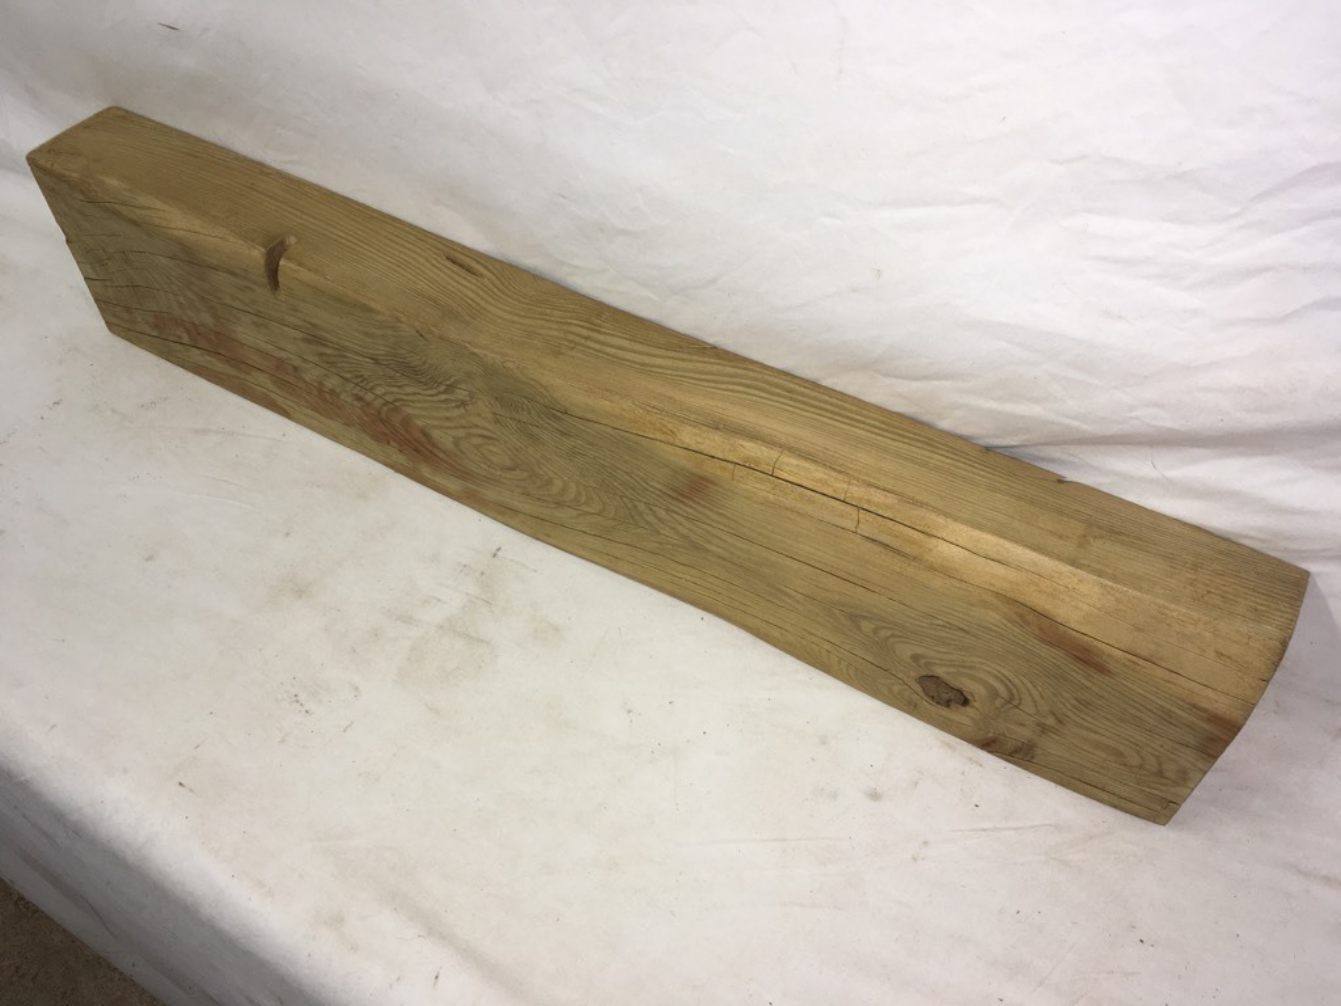 30 Inch Or 76cm Reclaimed Old Pine Timber Beam Floating Over Mantle Shelf Joist